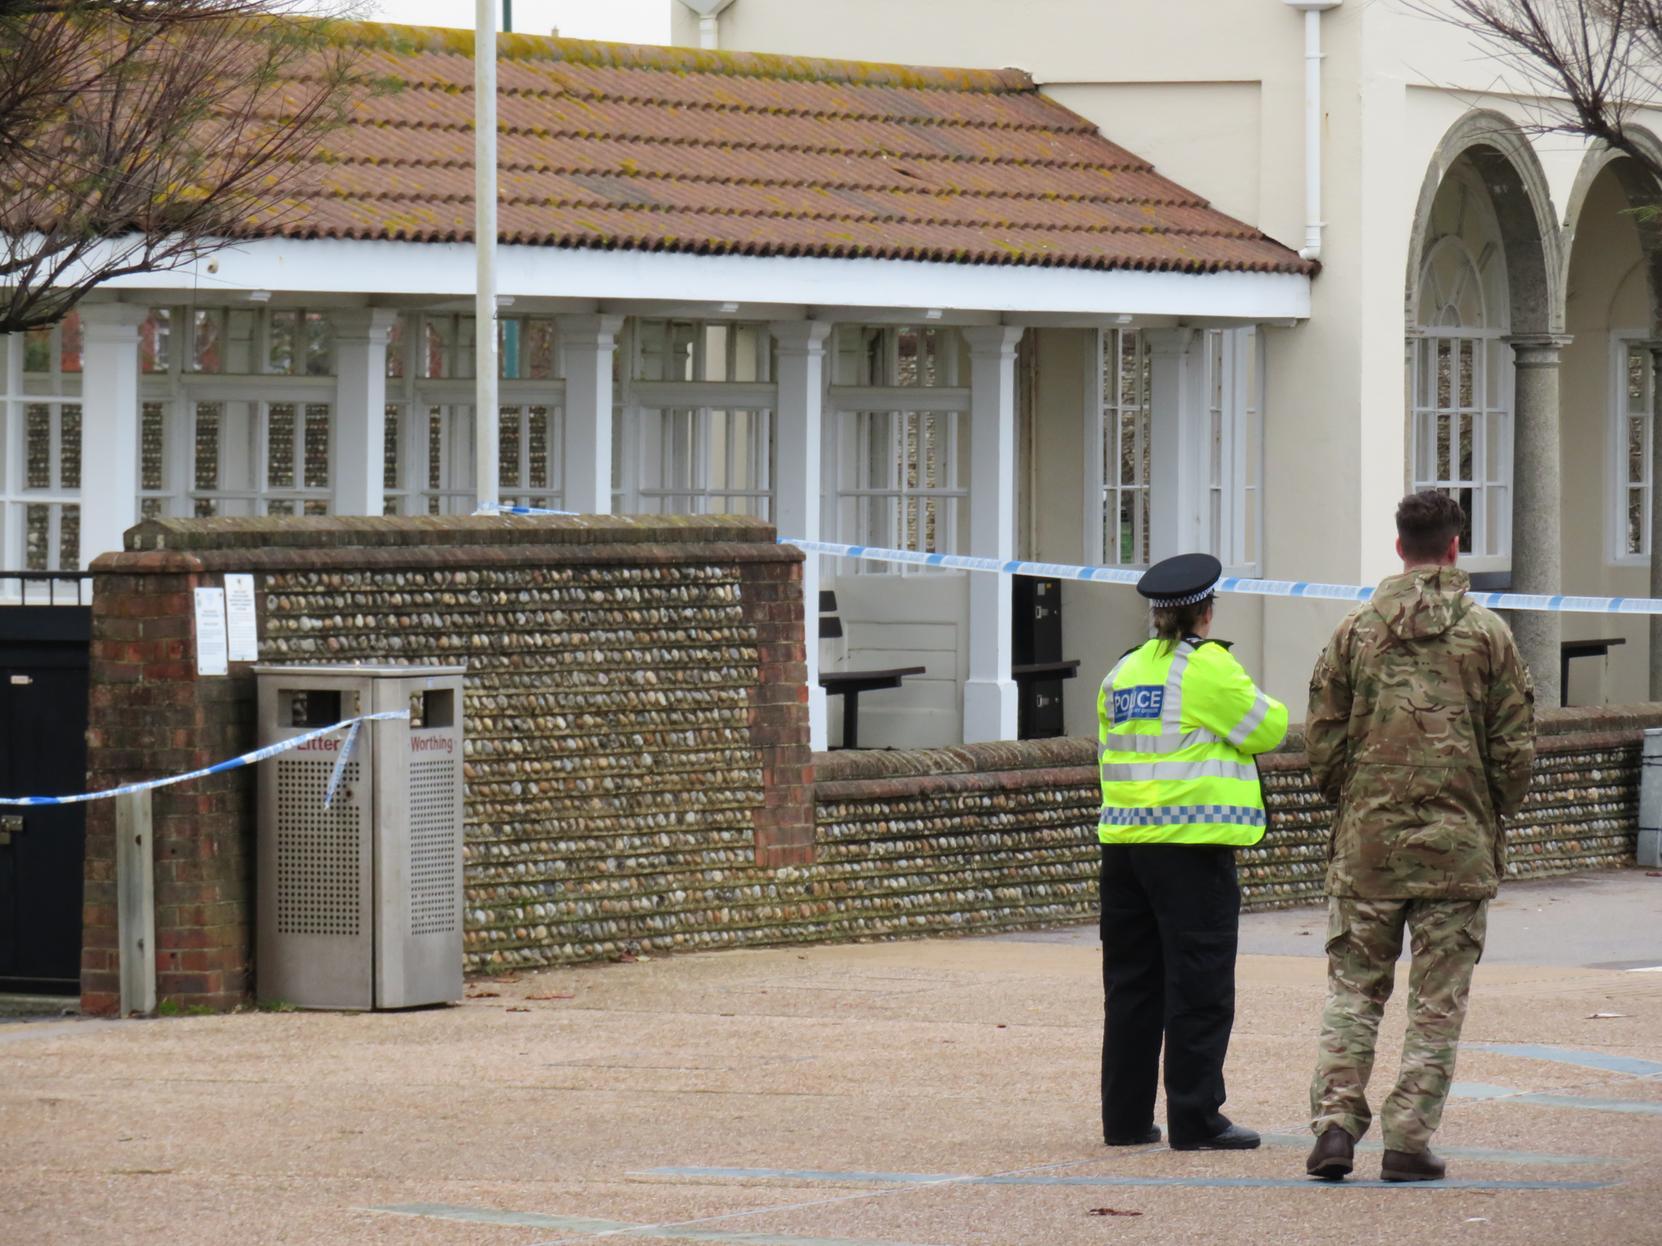 Explosives Ordnance Disposal (EOD) team member and police officer pictured by Worthing resident Nikki Sheeran